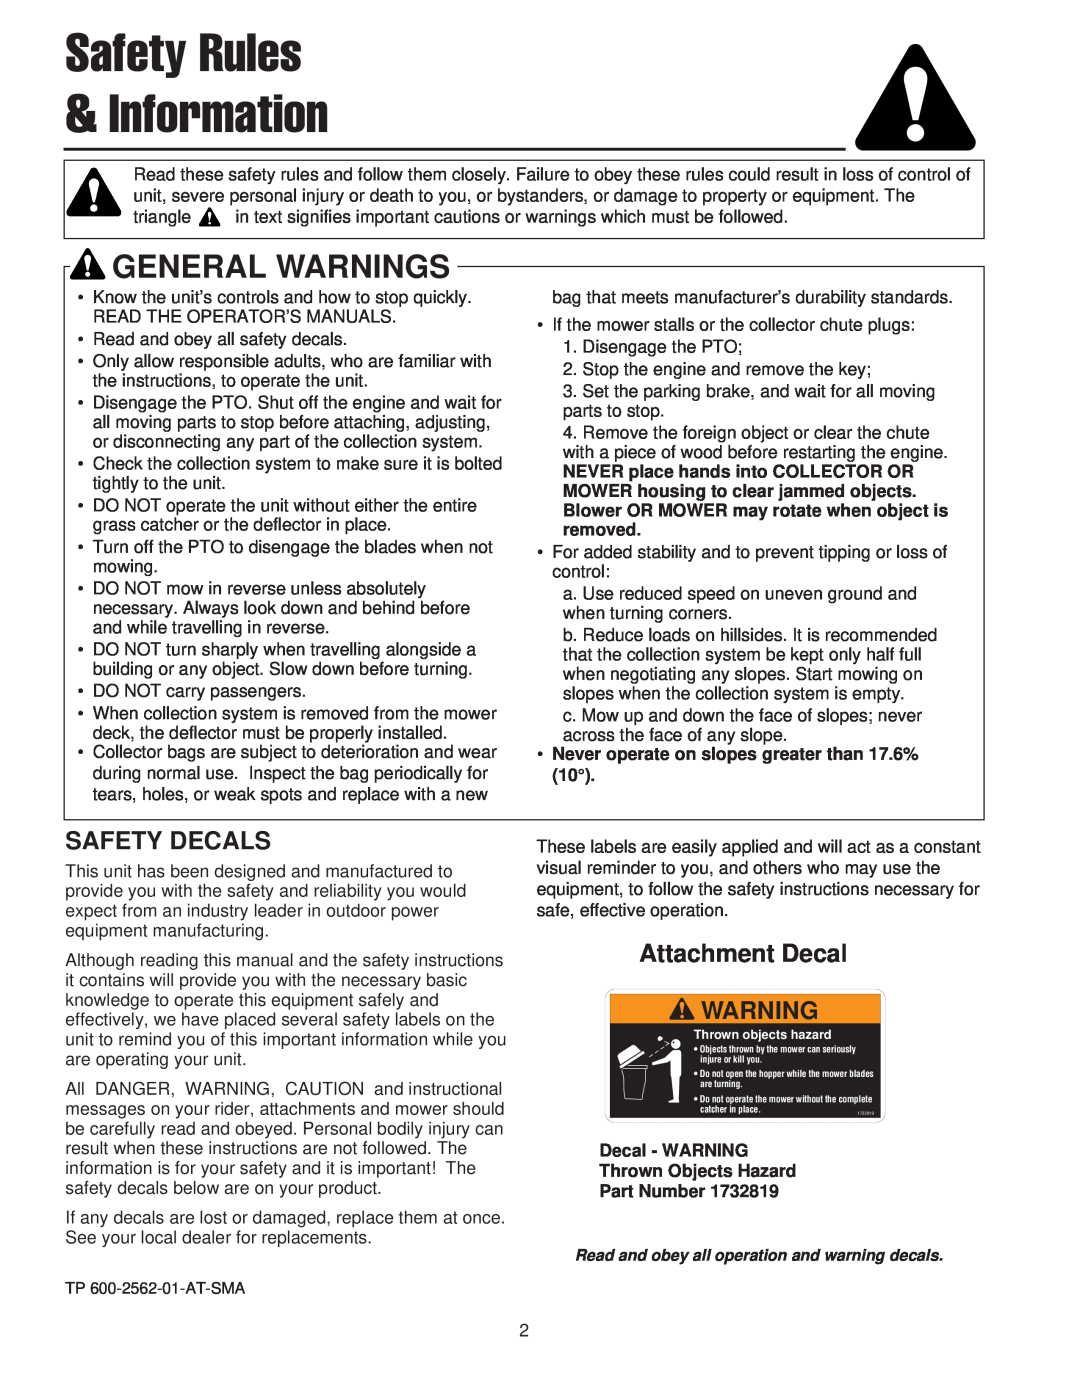 Briggs & Stratton 1695284 manual Safety Rules & Information, Safety Decals, Attachment Decal, General Warnings 